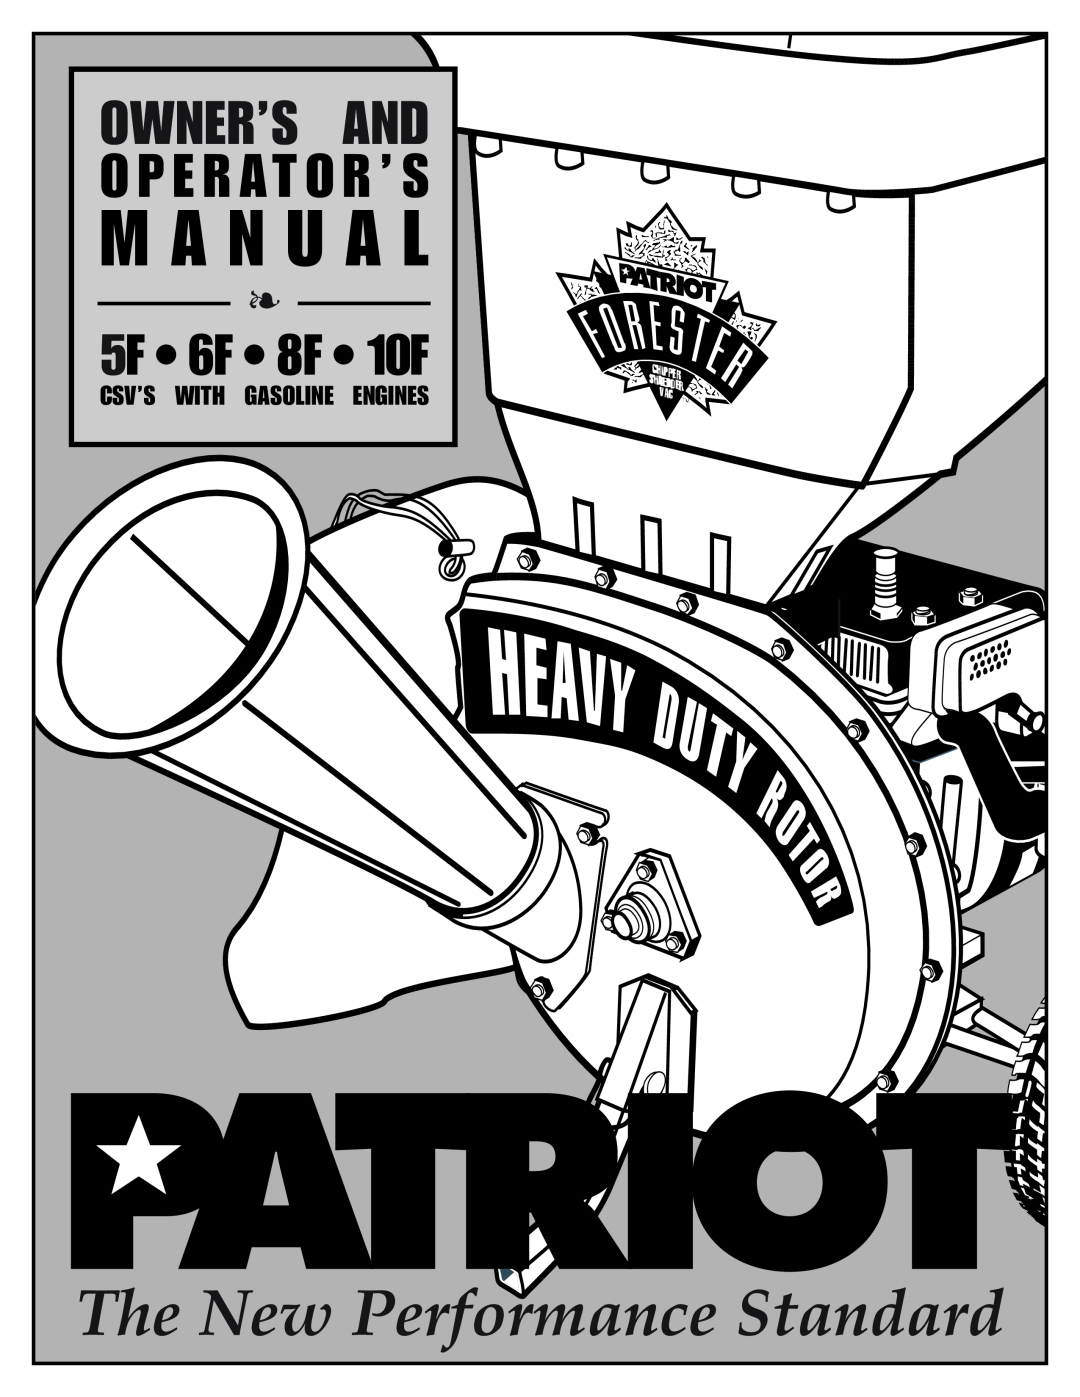 Patriot Products 5F, 6F, 8F, 10F manual M A N U A L, The New Performance Standard, Owner’S And, O P E R At O R ’ S 